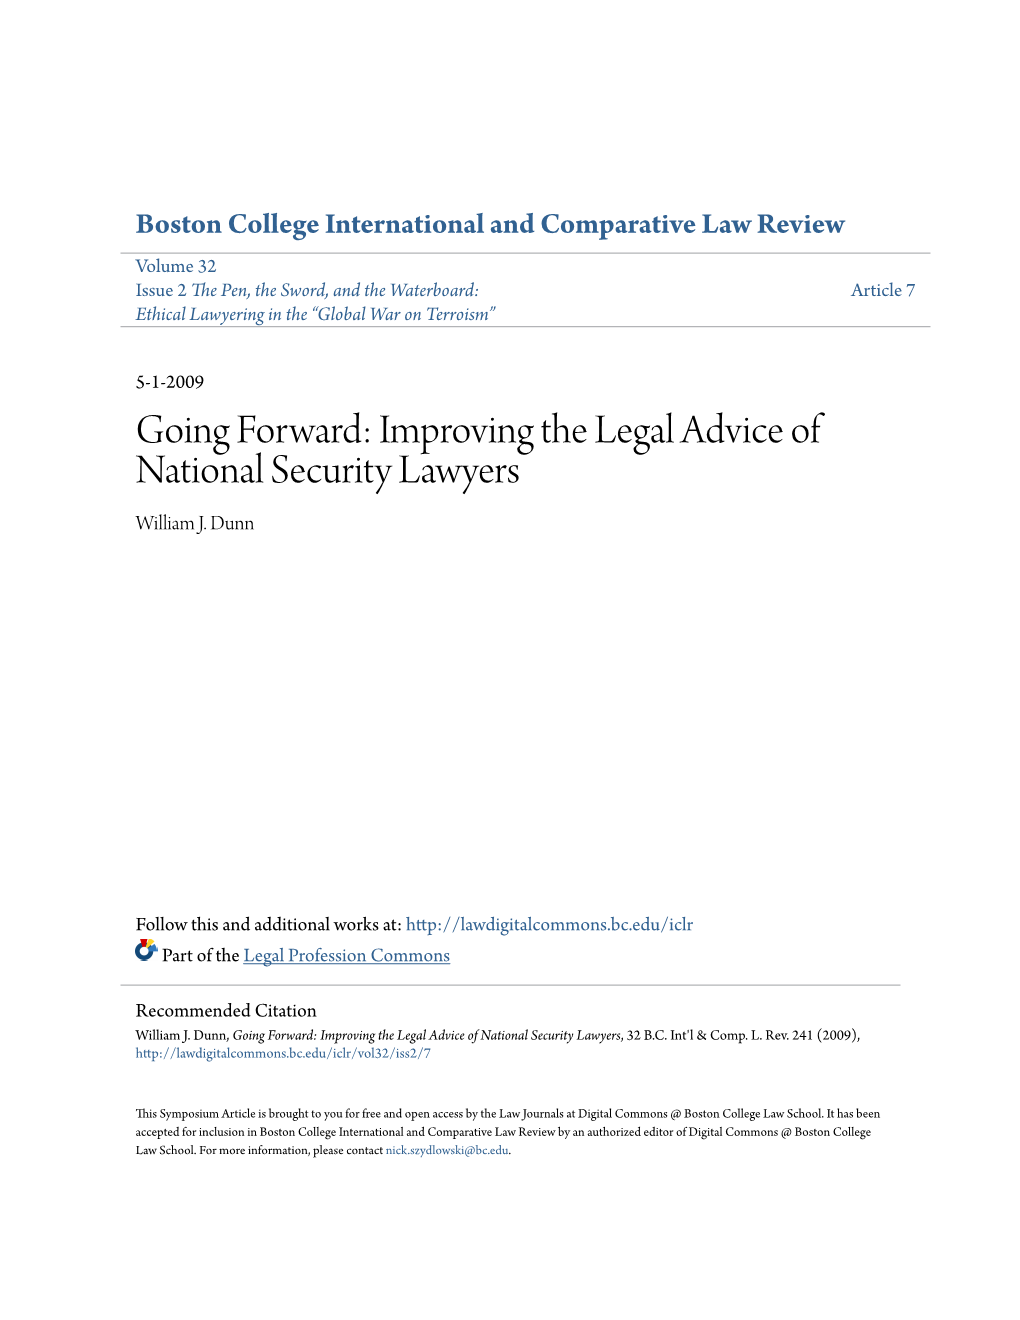 Going Forward: Improving the Legal Advice of National Security Lawyers William J